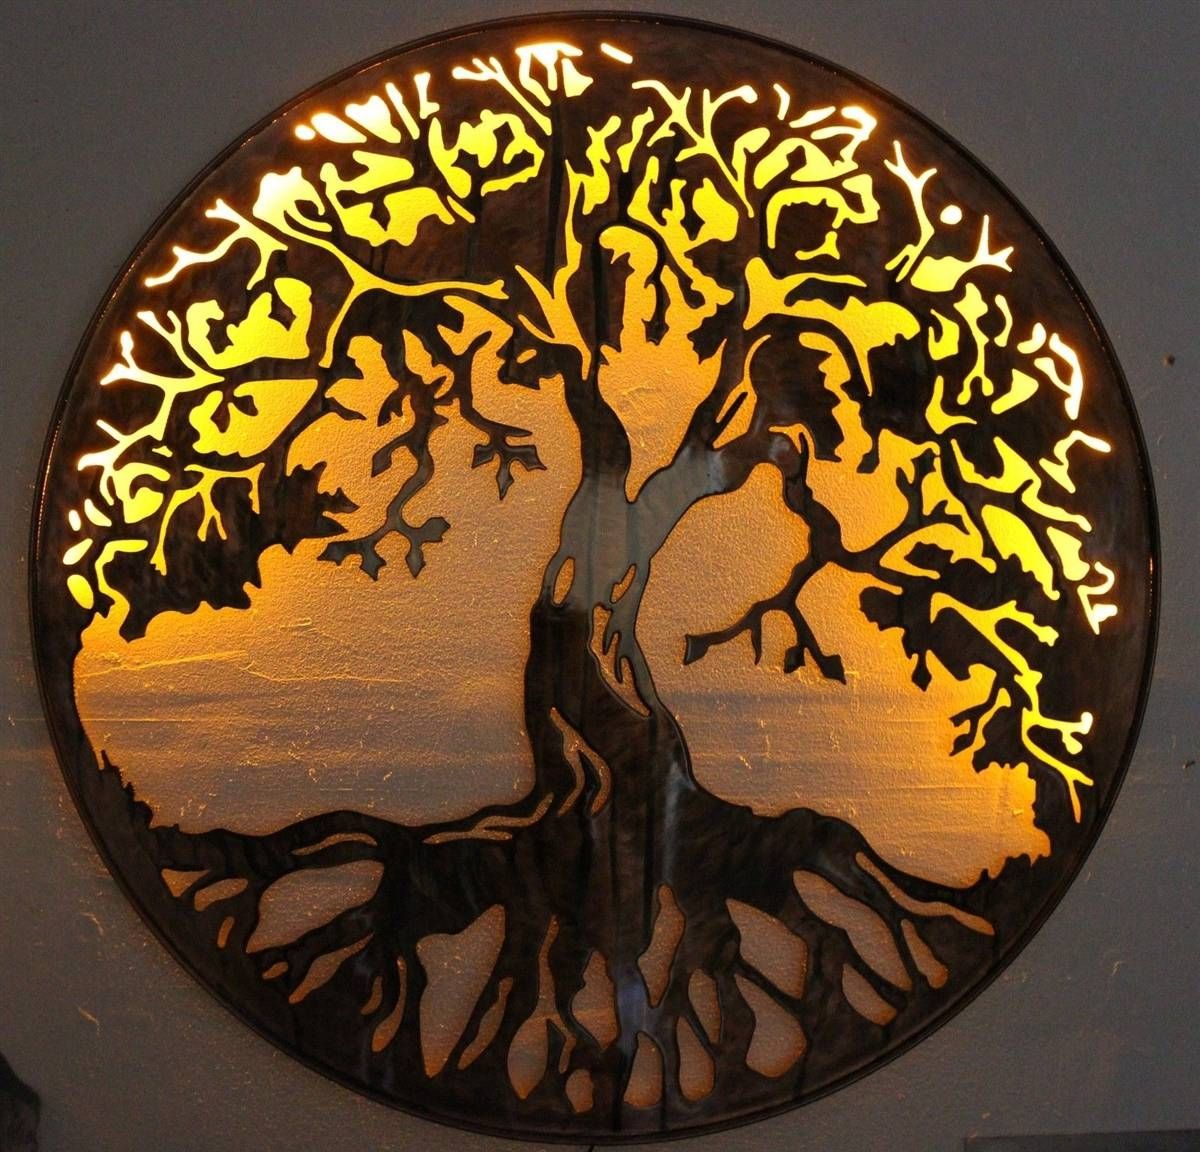 Tree Of Life Metal Wall Art 24" With Led Lightshgmw Pertaining To Most Up To Date Oak Tree Metal Wall Art (Gallery 7 of 30)